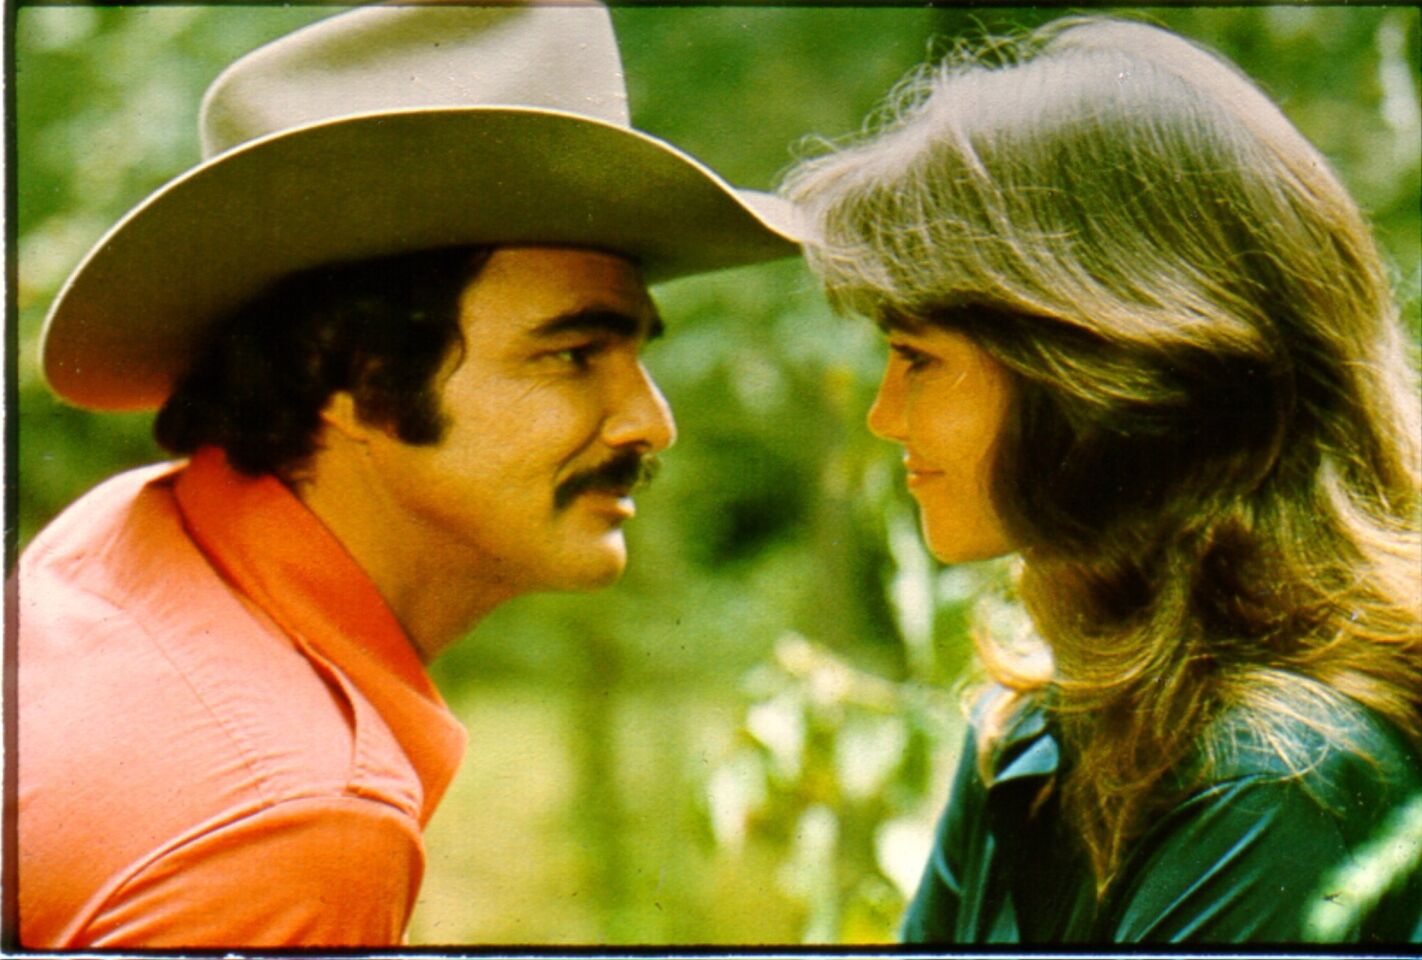 Burt Reynolds and Sally Field in "Smokey and the Bandit."